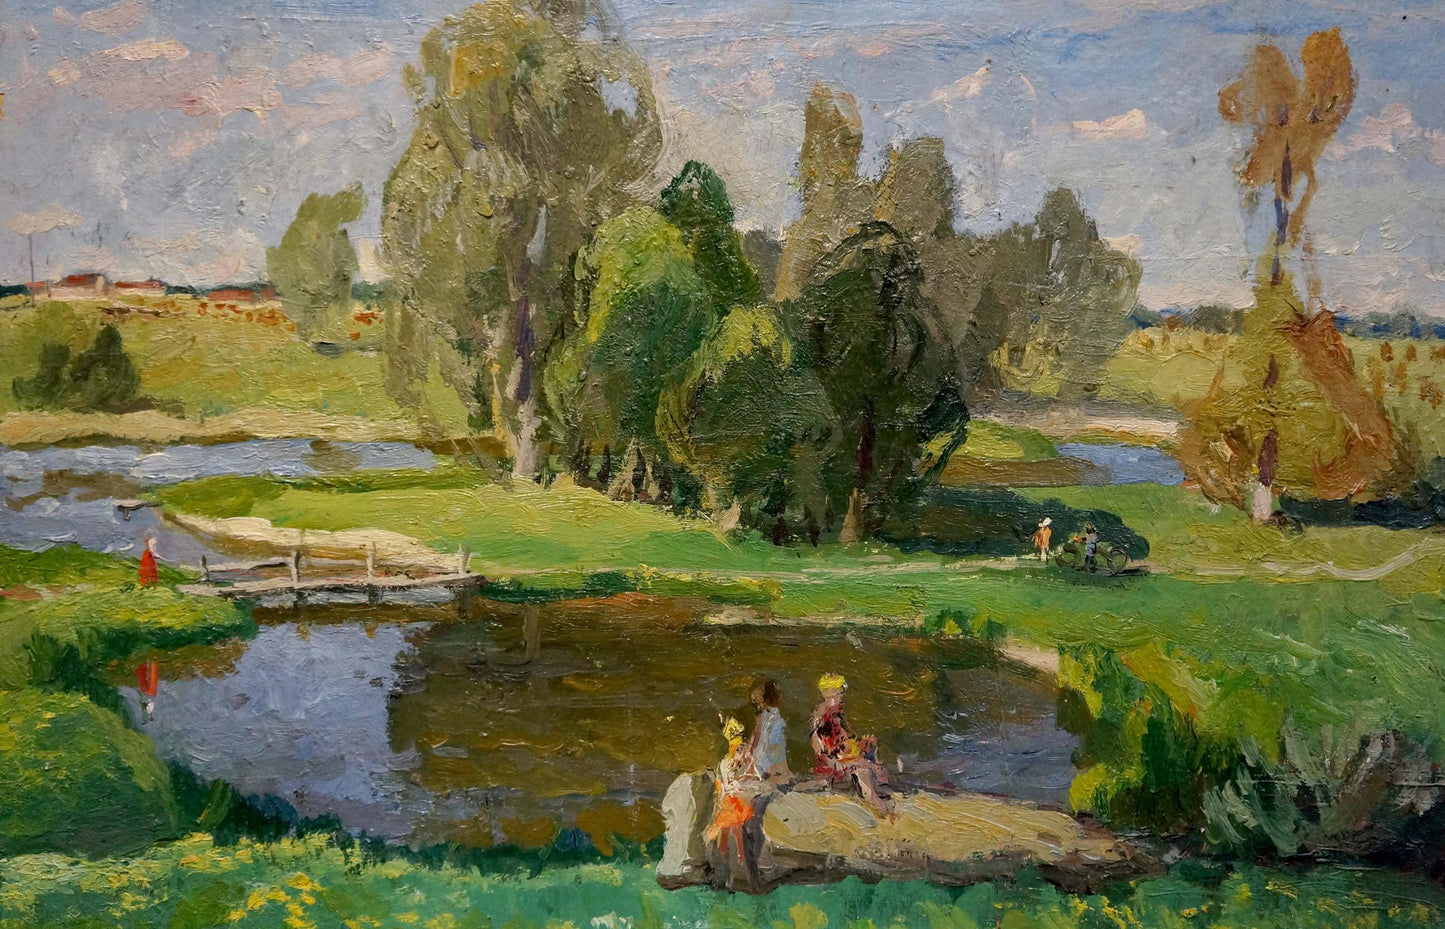 Oil painting Children at the pond